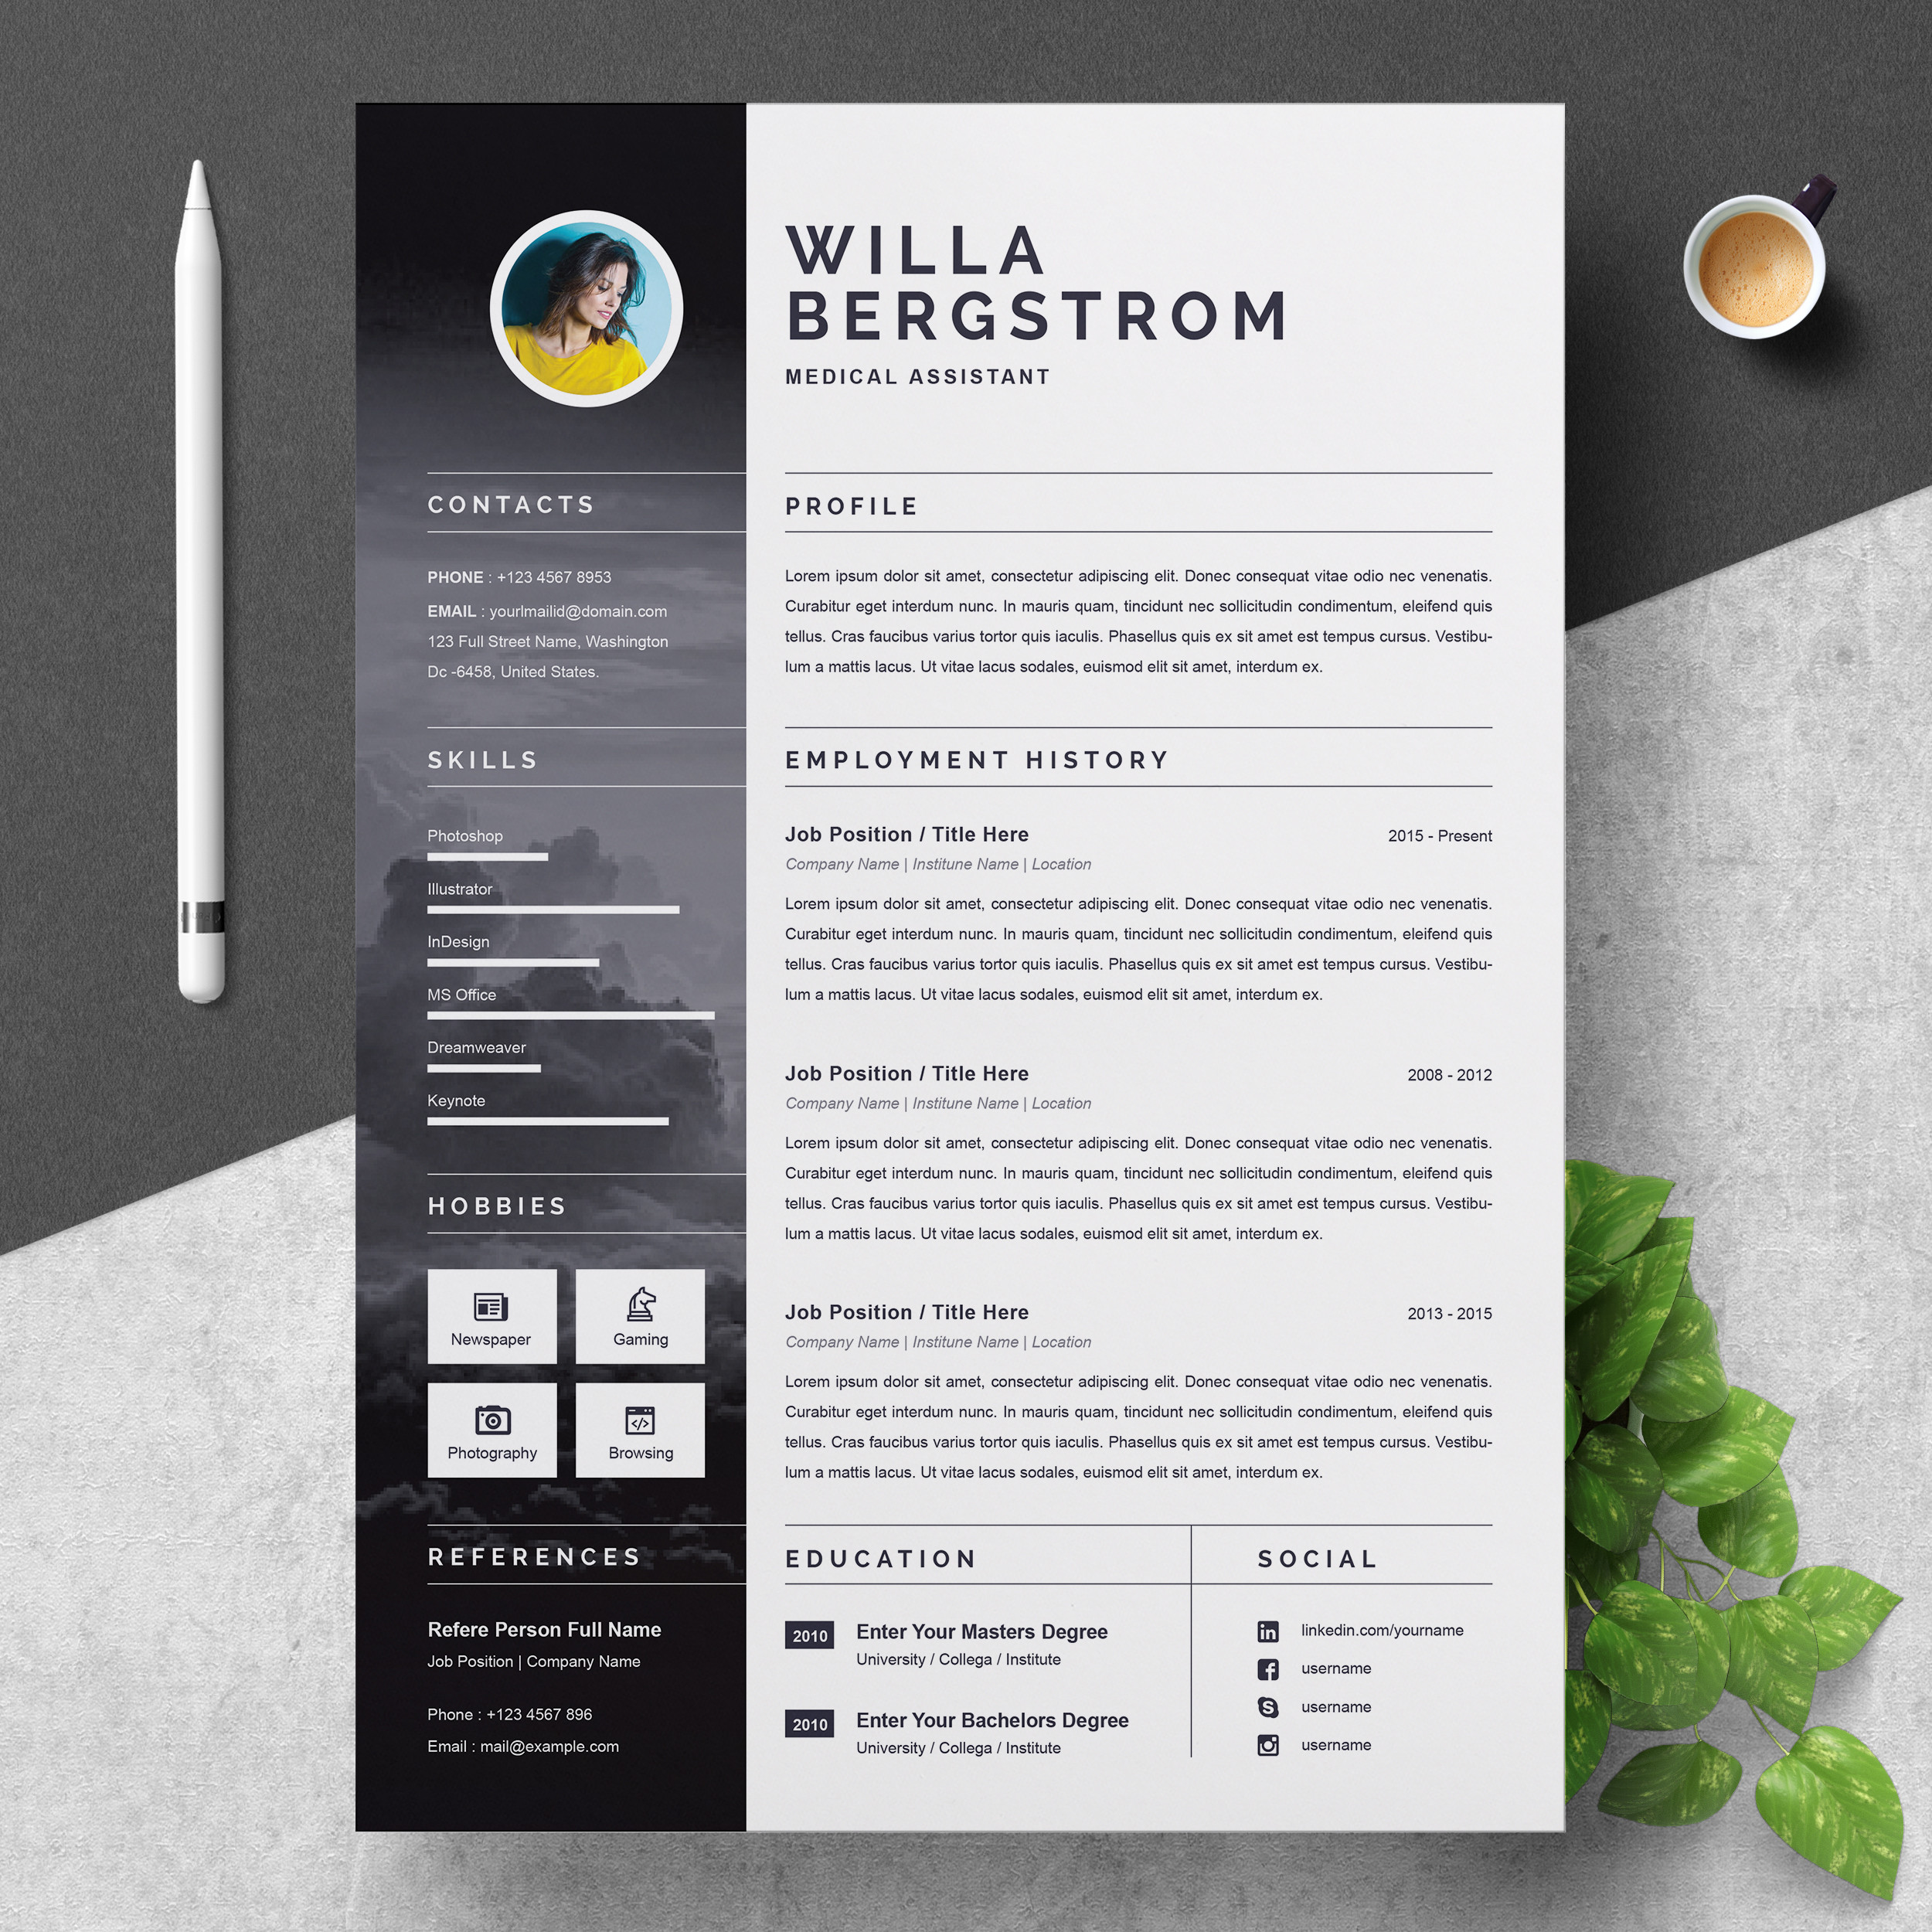 Medical assistant Resume Template Free Download Resume Template for Medical assistant â Free Resumes, Templates …